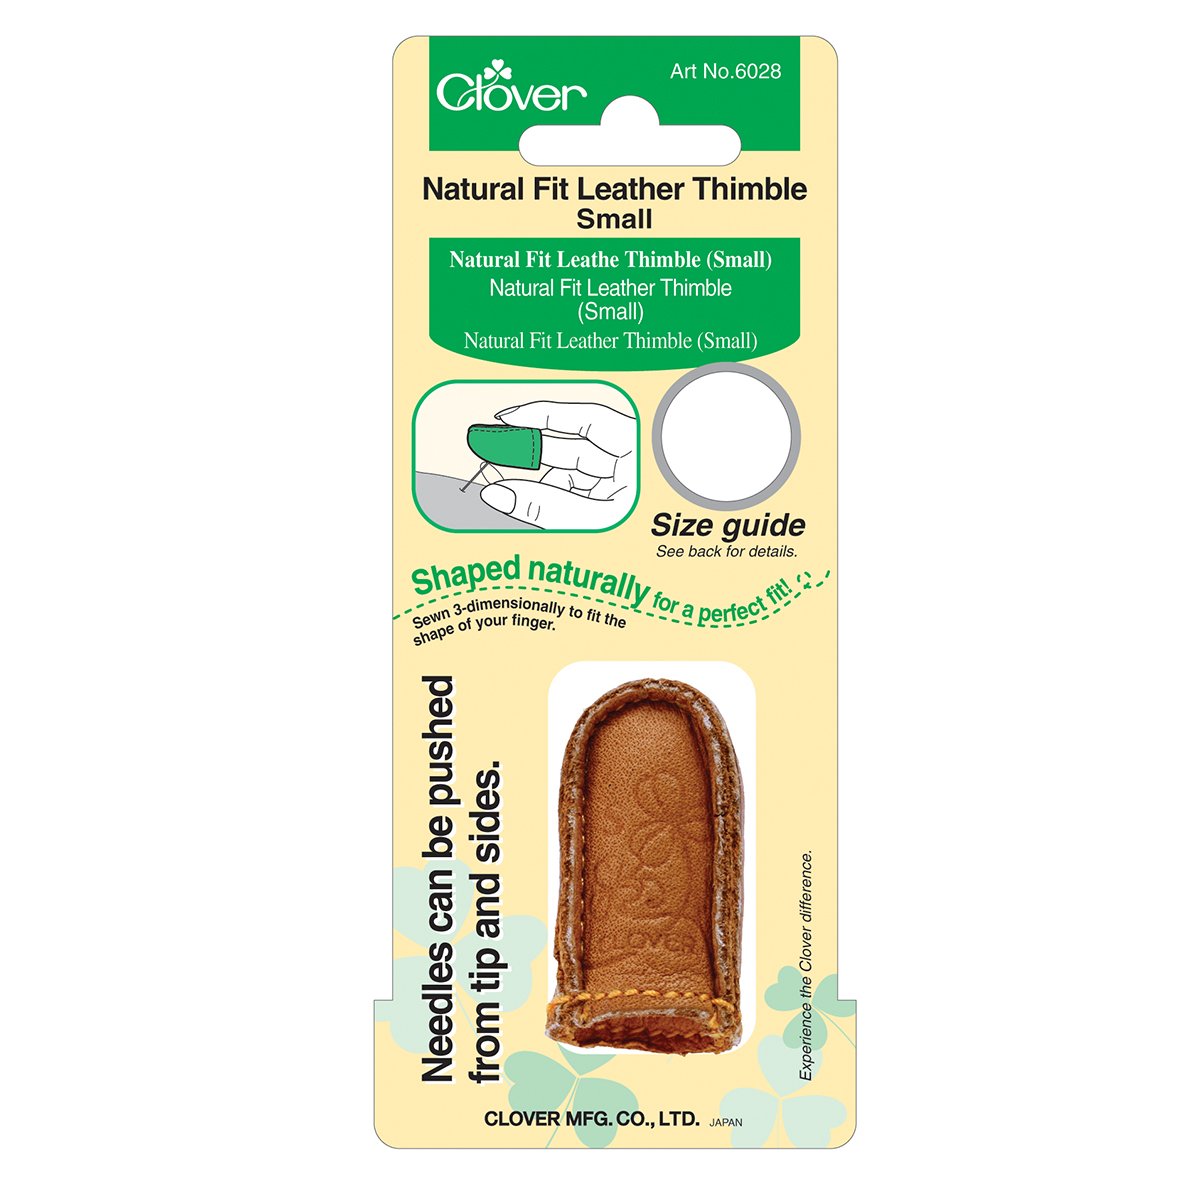 CLV - Natural Fit Leather Thimble - Small